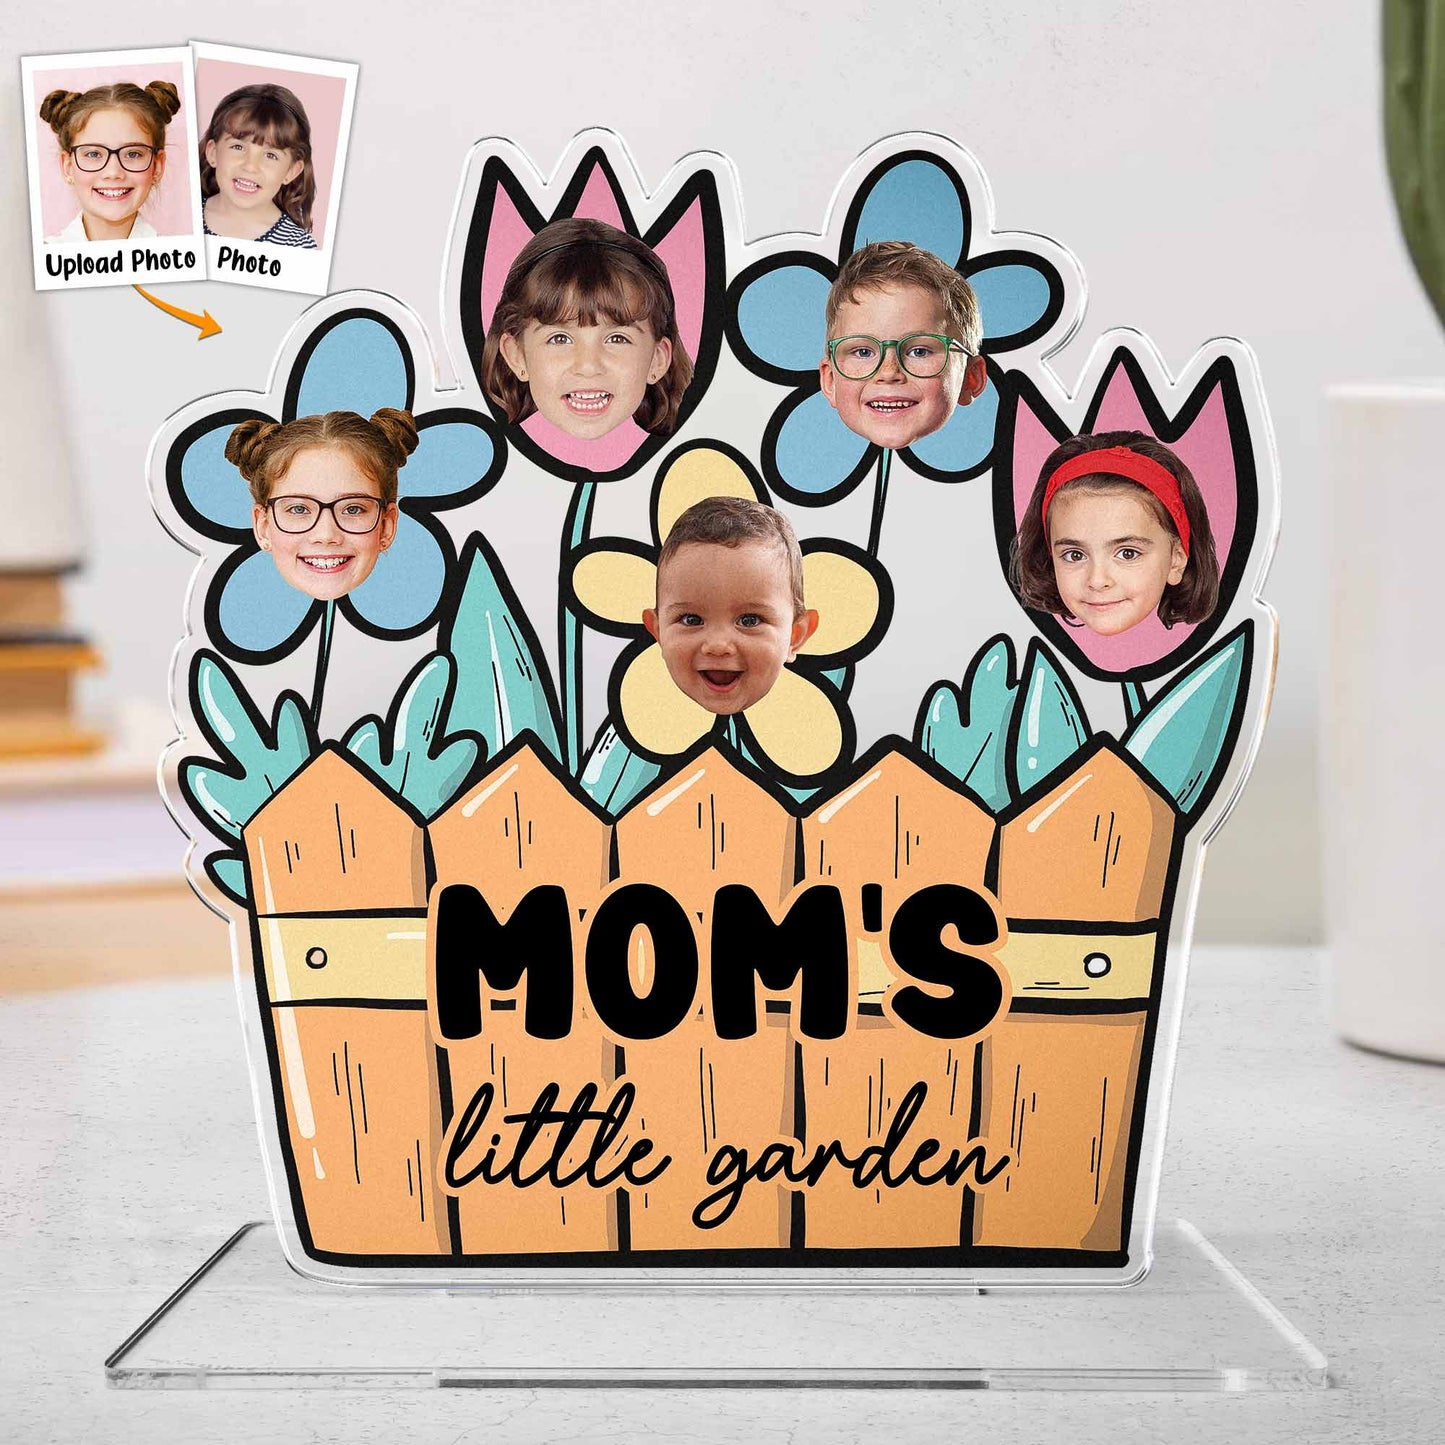 Mom's Little Garden - Personalized Acrylic Photo Plaque